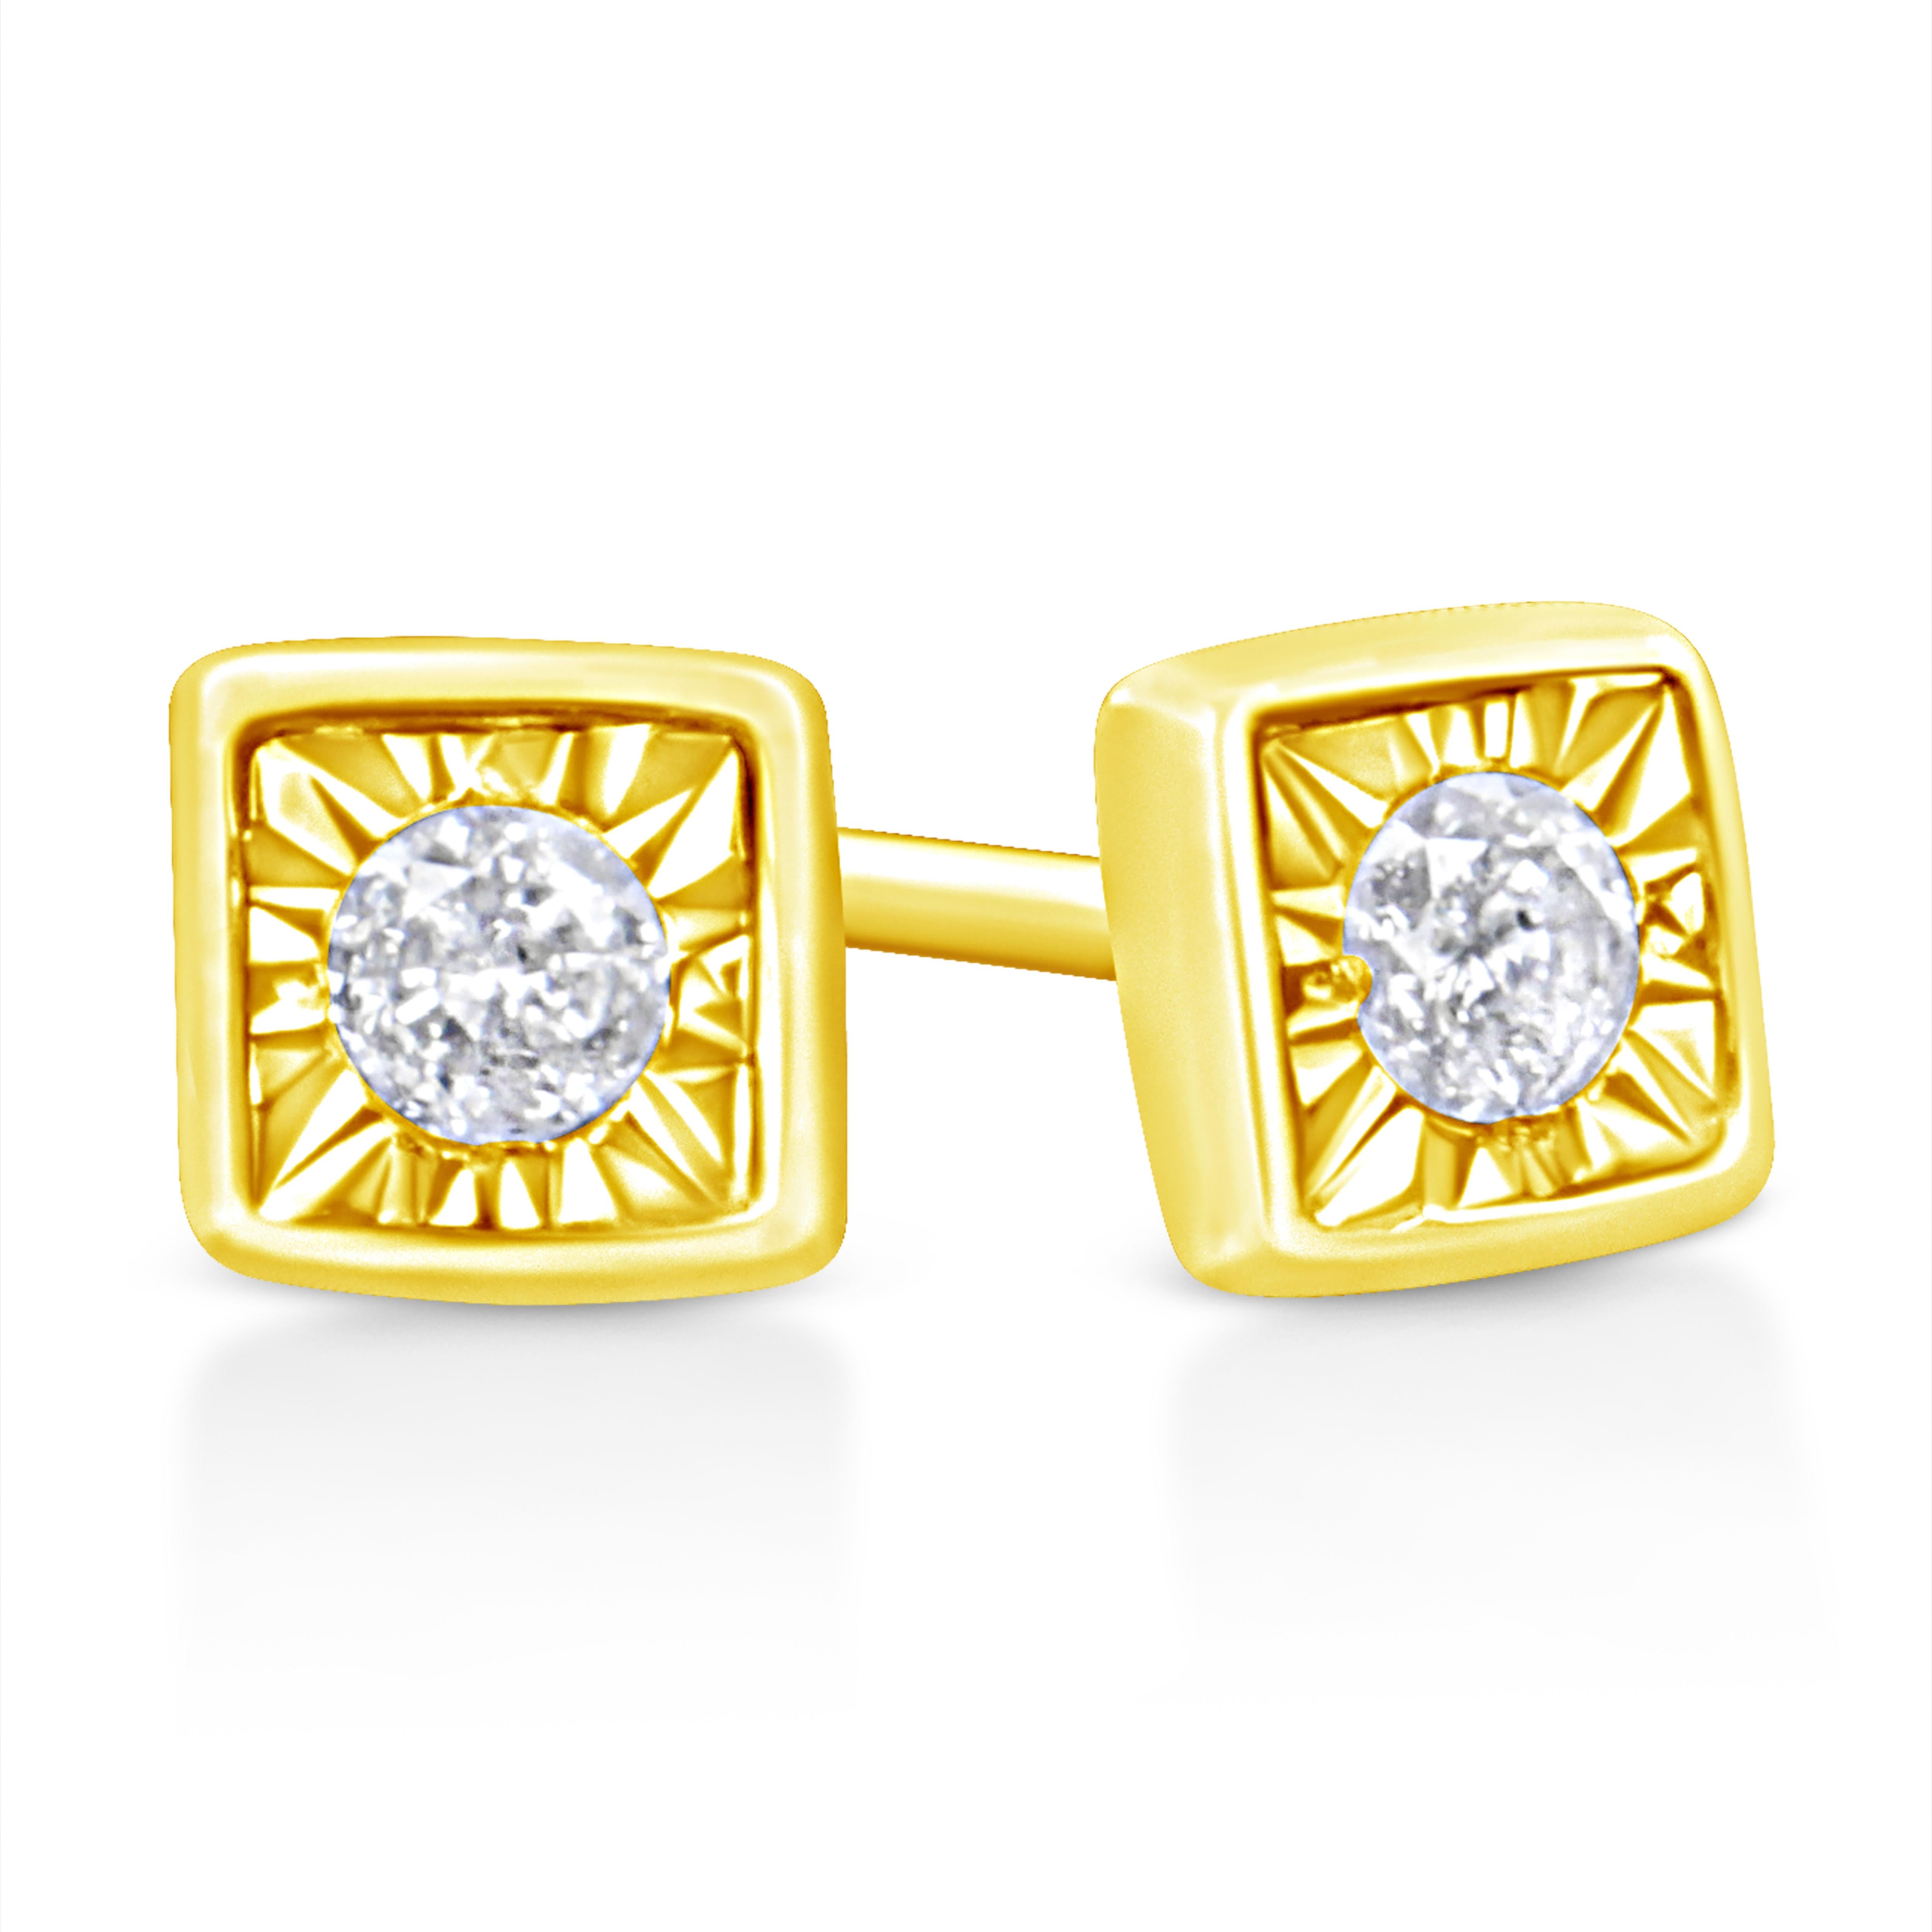 These square shaped stud earrings are crafted in 10k yellow gold plated sterling silver and feature 1/10ct TDW of diamonds. Each earring features a single sparkling round cut diamond in a miracle setting that adds to the earrings sparkle. A polished